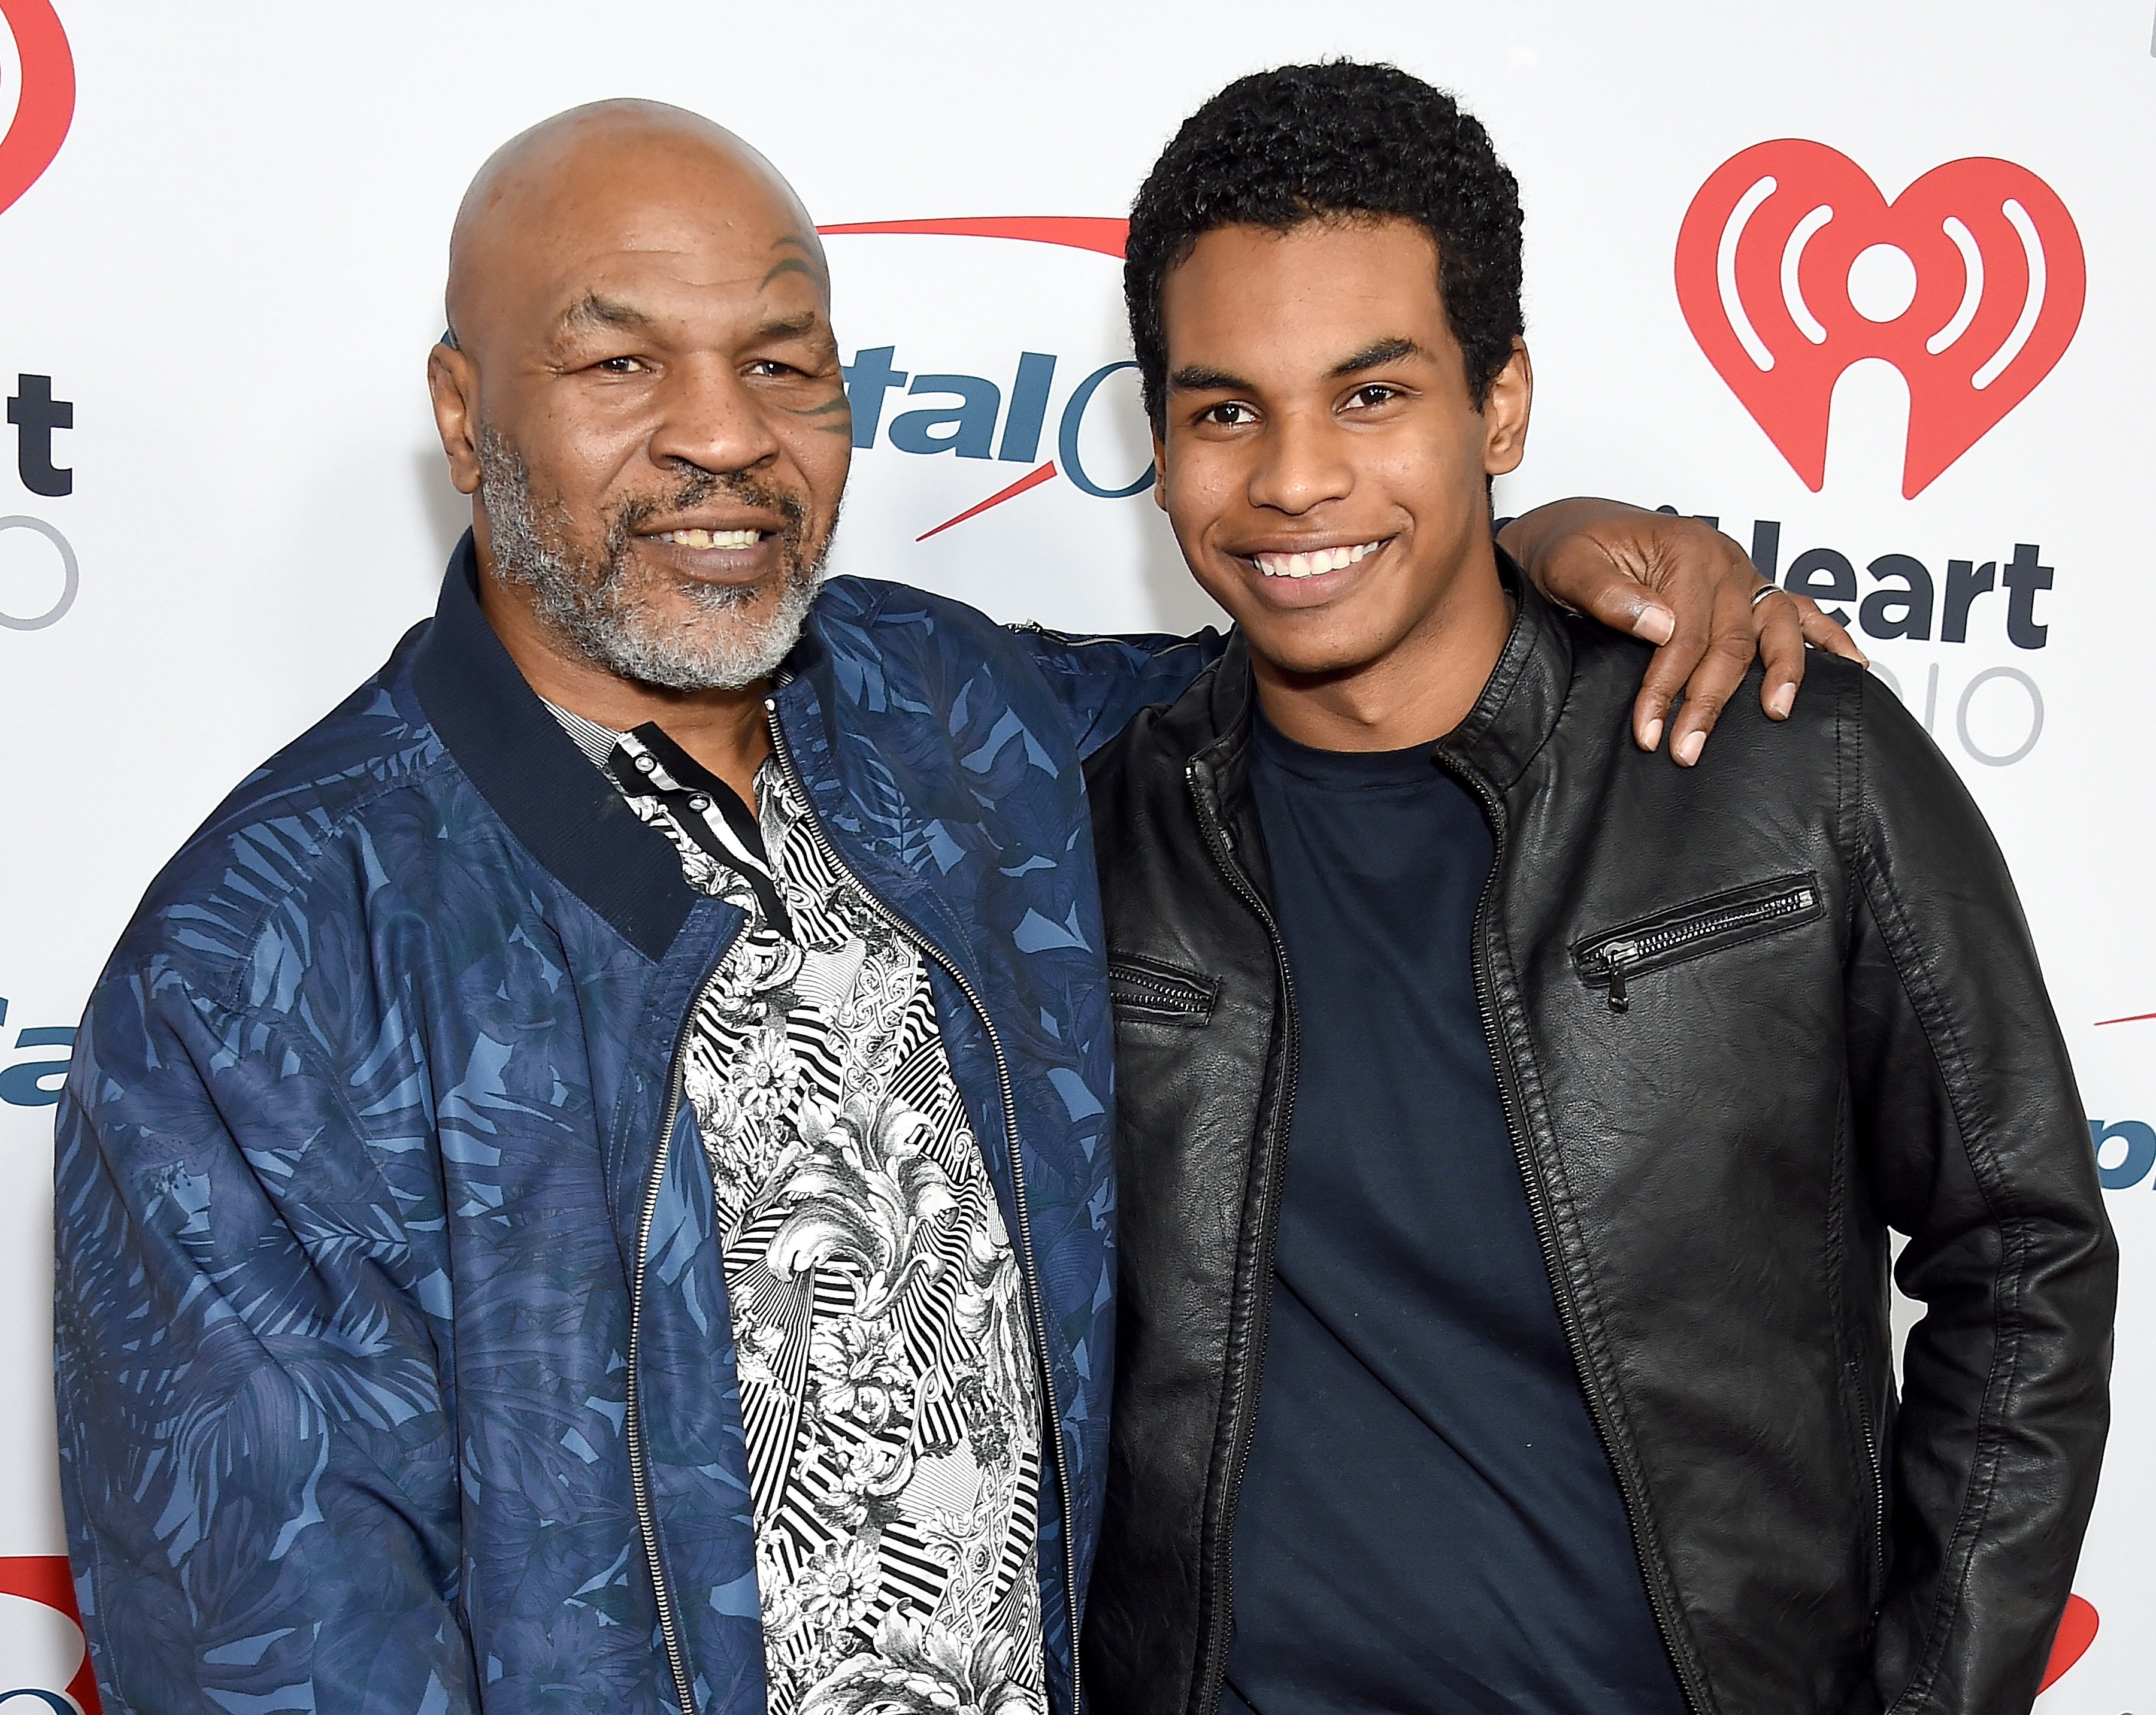 Mike Tyson and Miguel Leon Tyson at iHeartRadio Theater on January 18, 2019, in Burbank, California. | Source: Getty Images